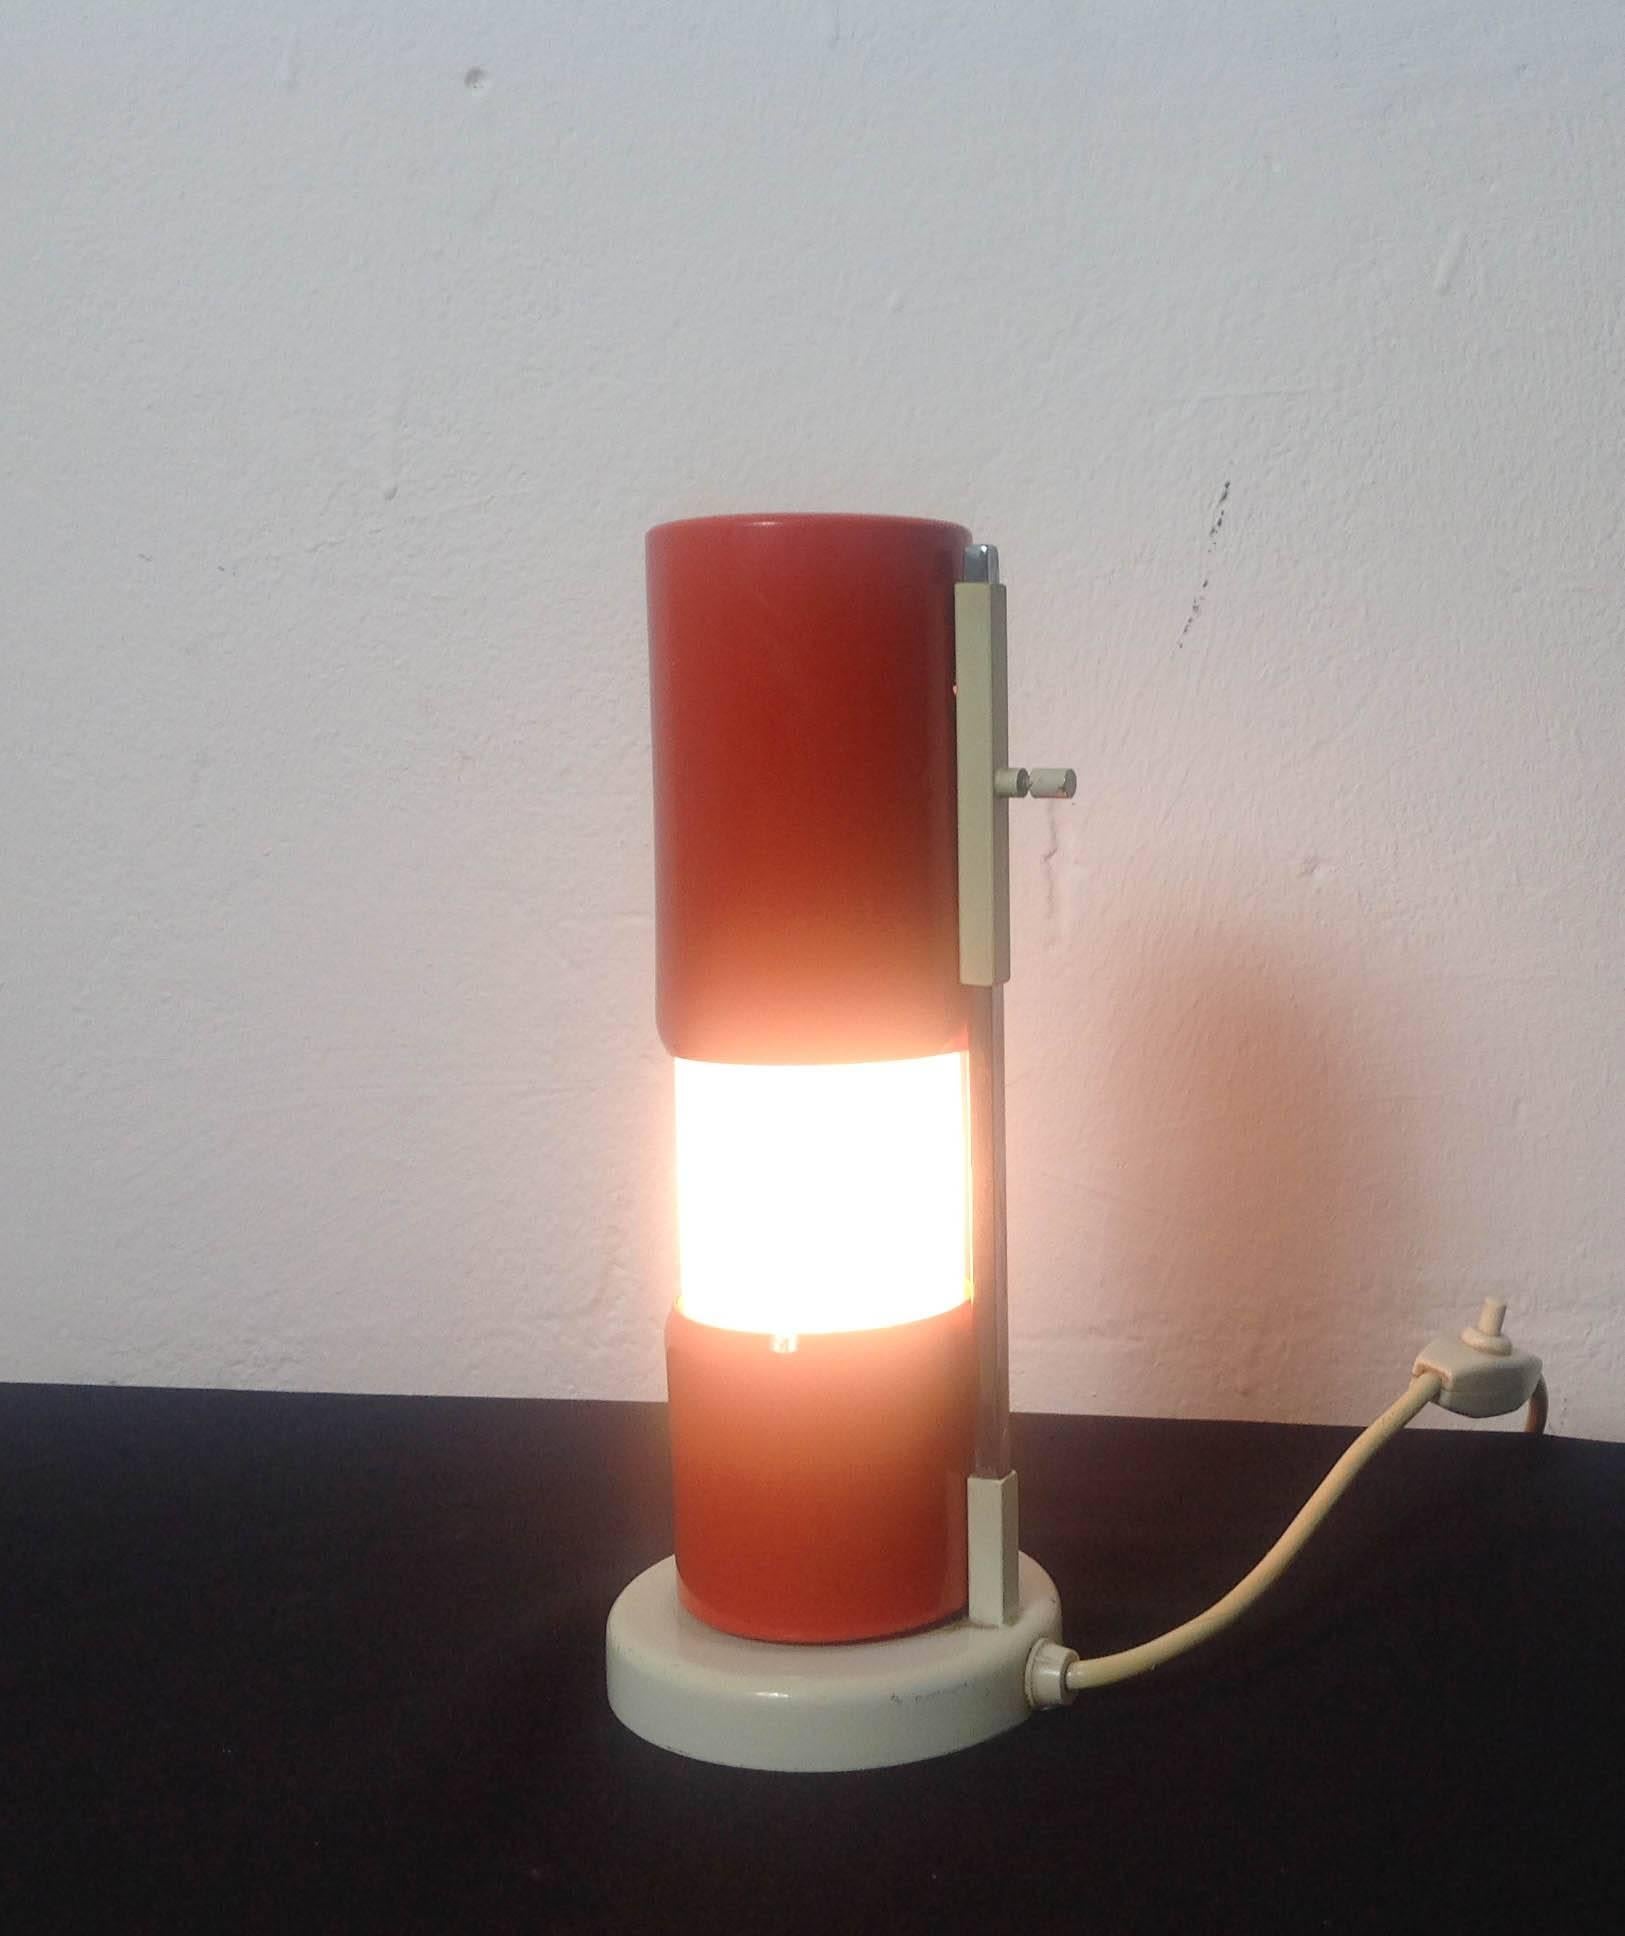 Whimsical small table or desk lamp. Schuivertje ('little slider') was originally designed in the 1930s and reintroduced as part of the GISO line in the 1960s. The top of the metal tube slides up to reveal the light inside, hence the name. This is